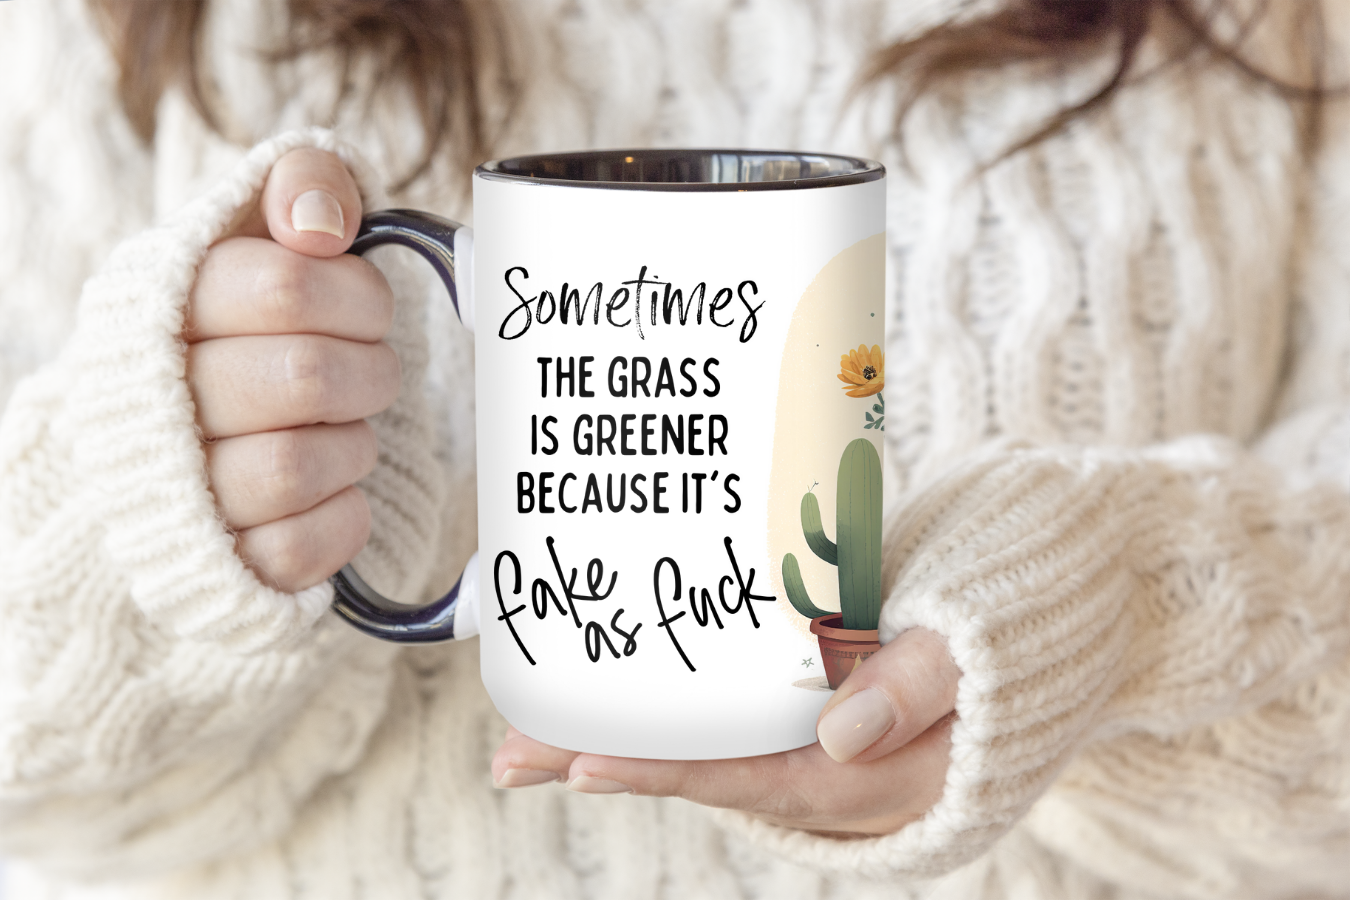 Sometimes The Grass Is Greener Because It's Fake As Fuck | Mug - The Pretty Things.ca